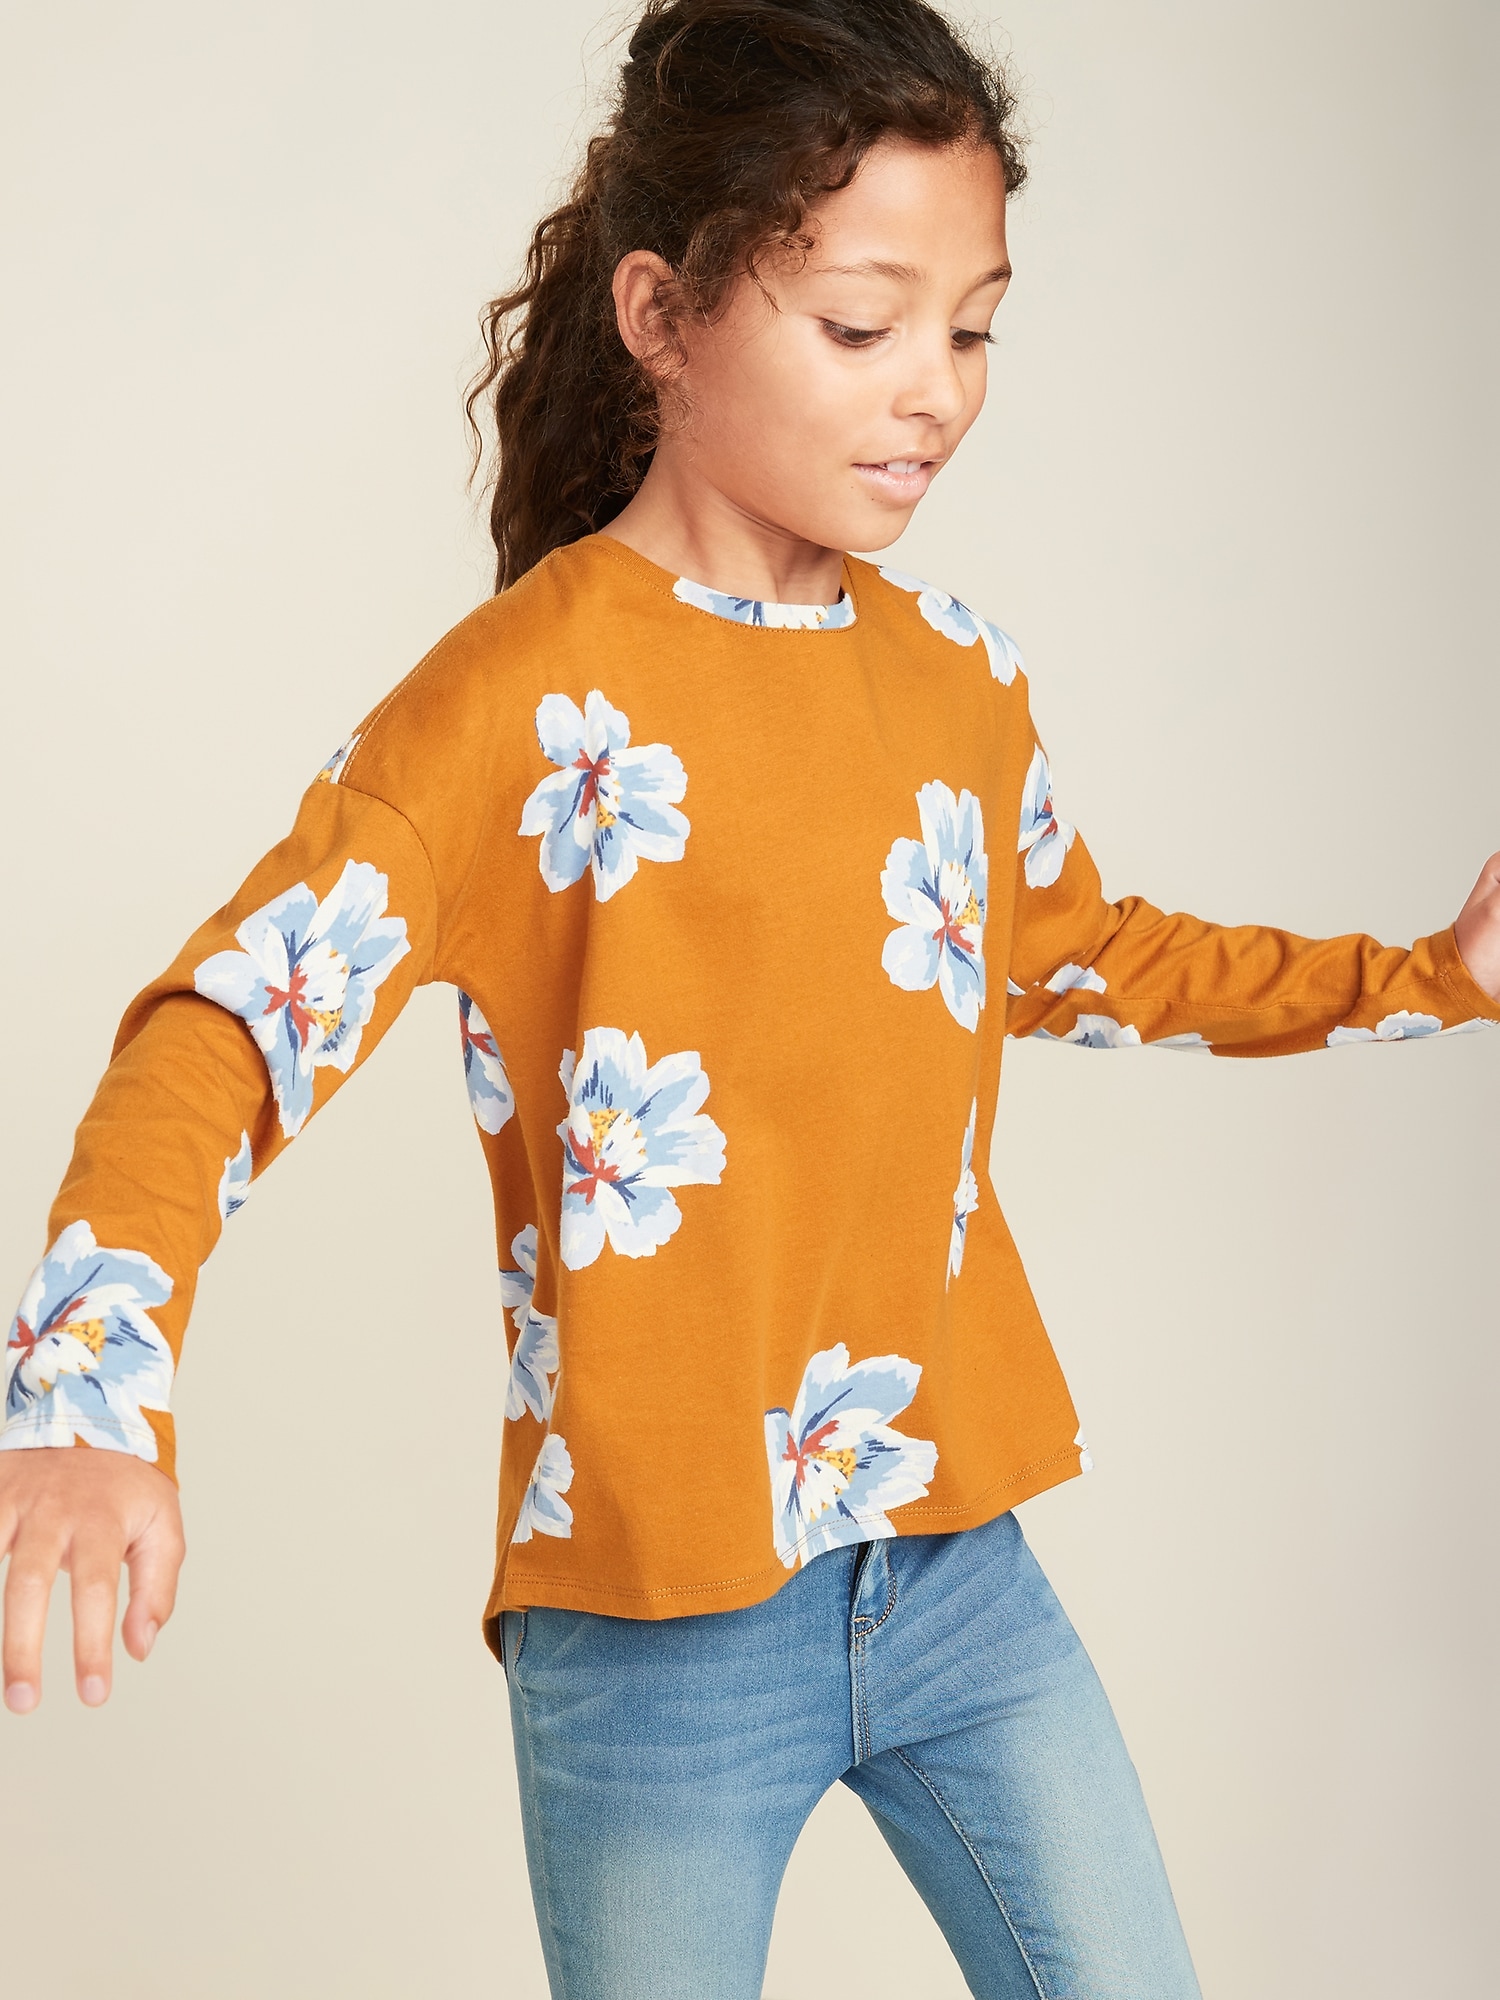 Printed Softest Long-Sleeve Crew-Neck Tee For Girls | Old Navy